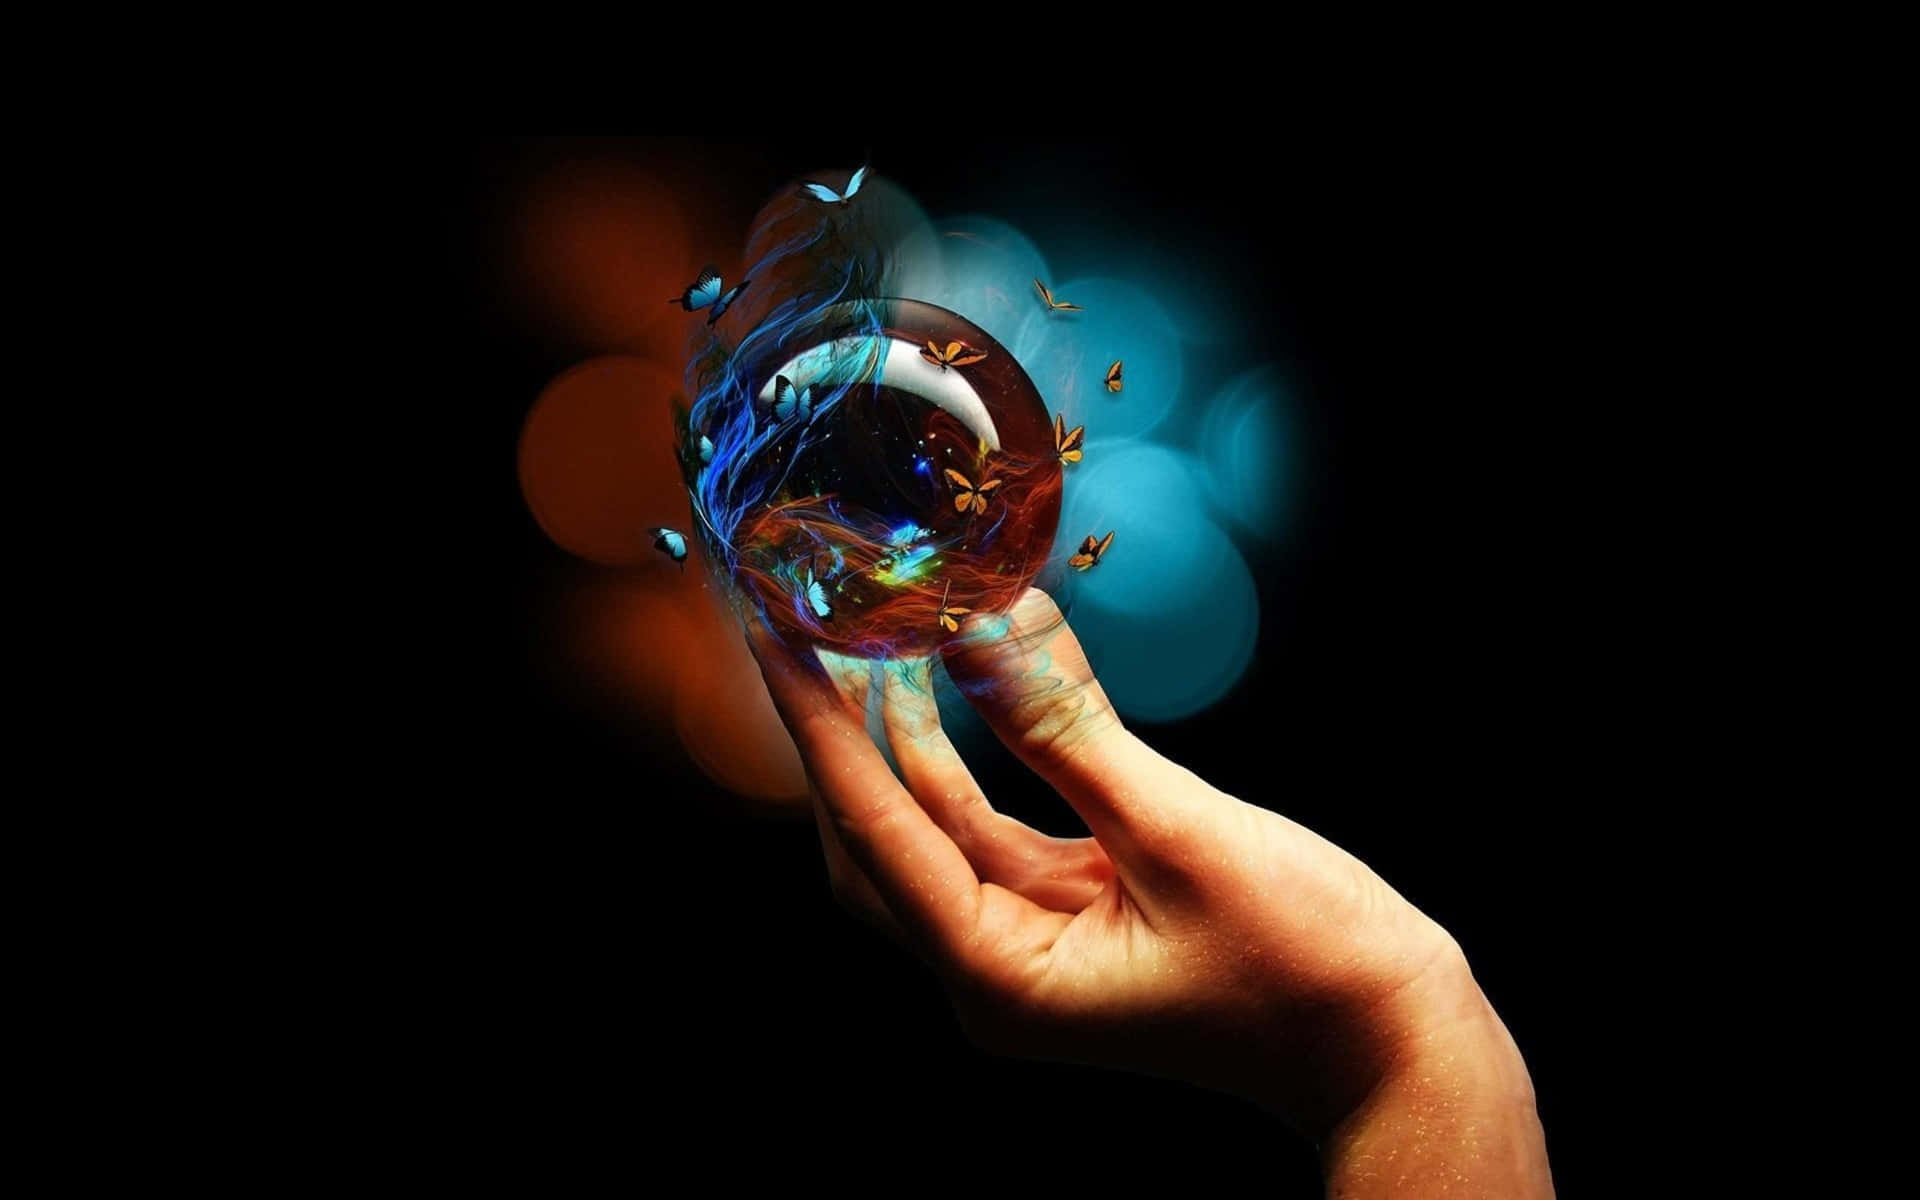 Captivating Crystal Ball on a Wooden Table Wallpaper